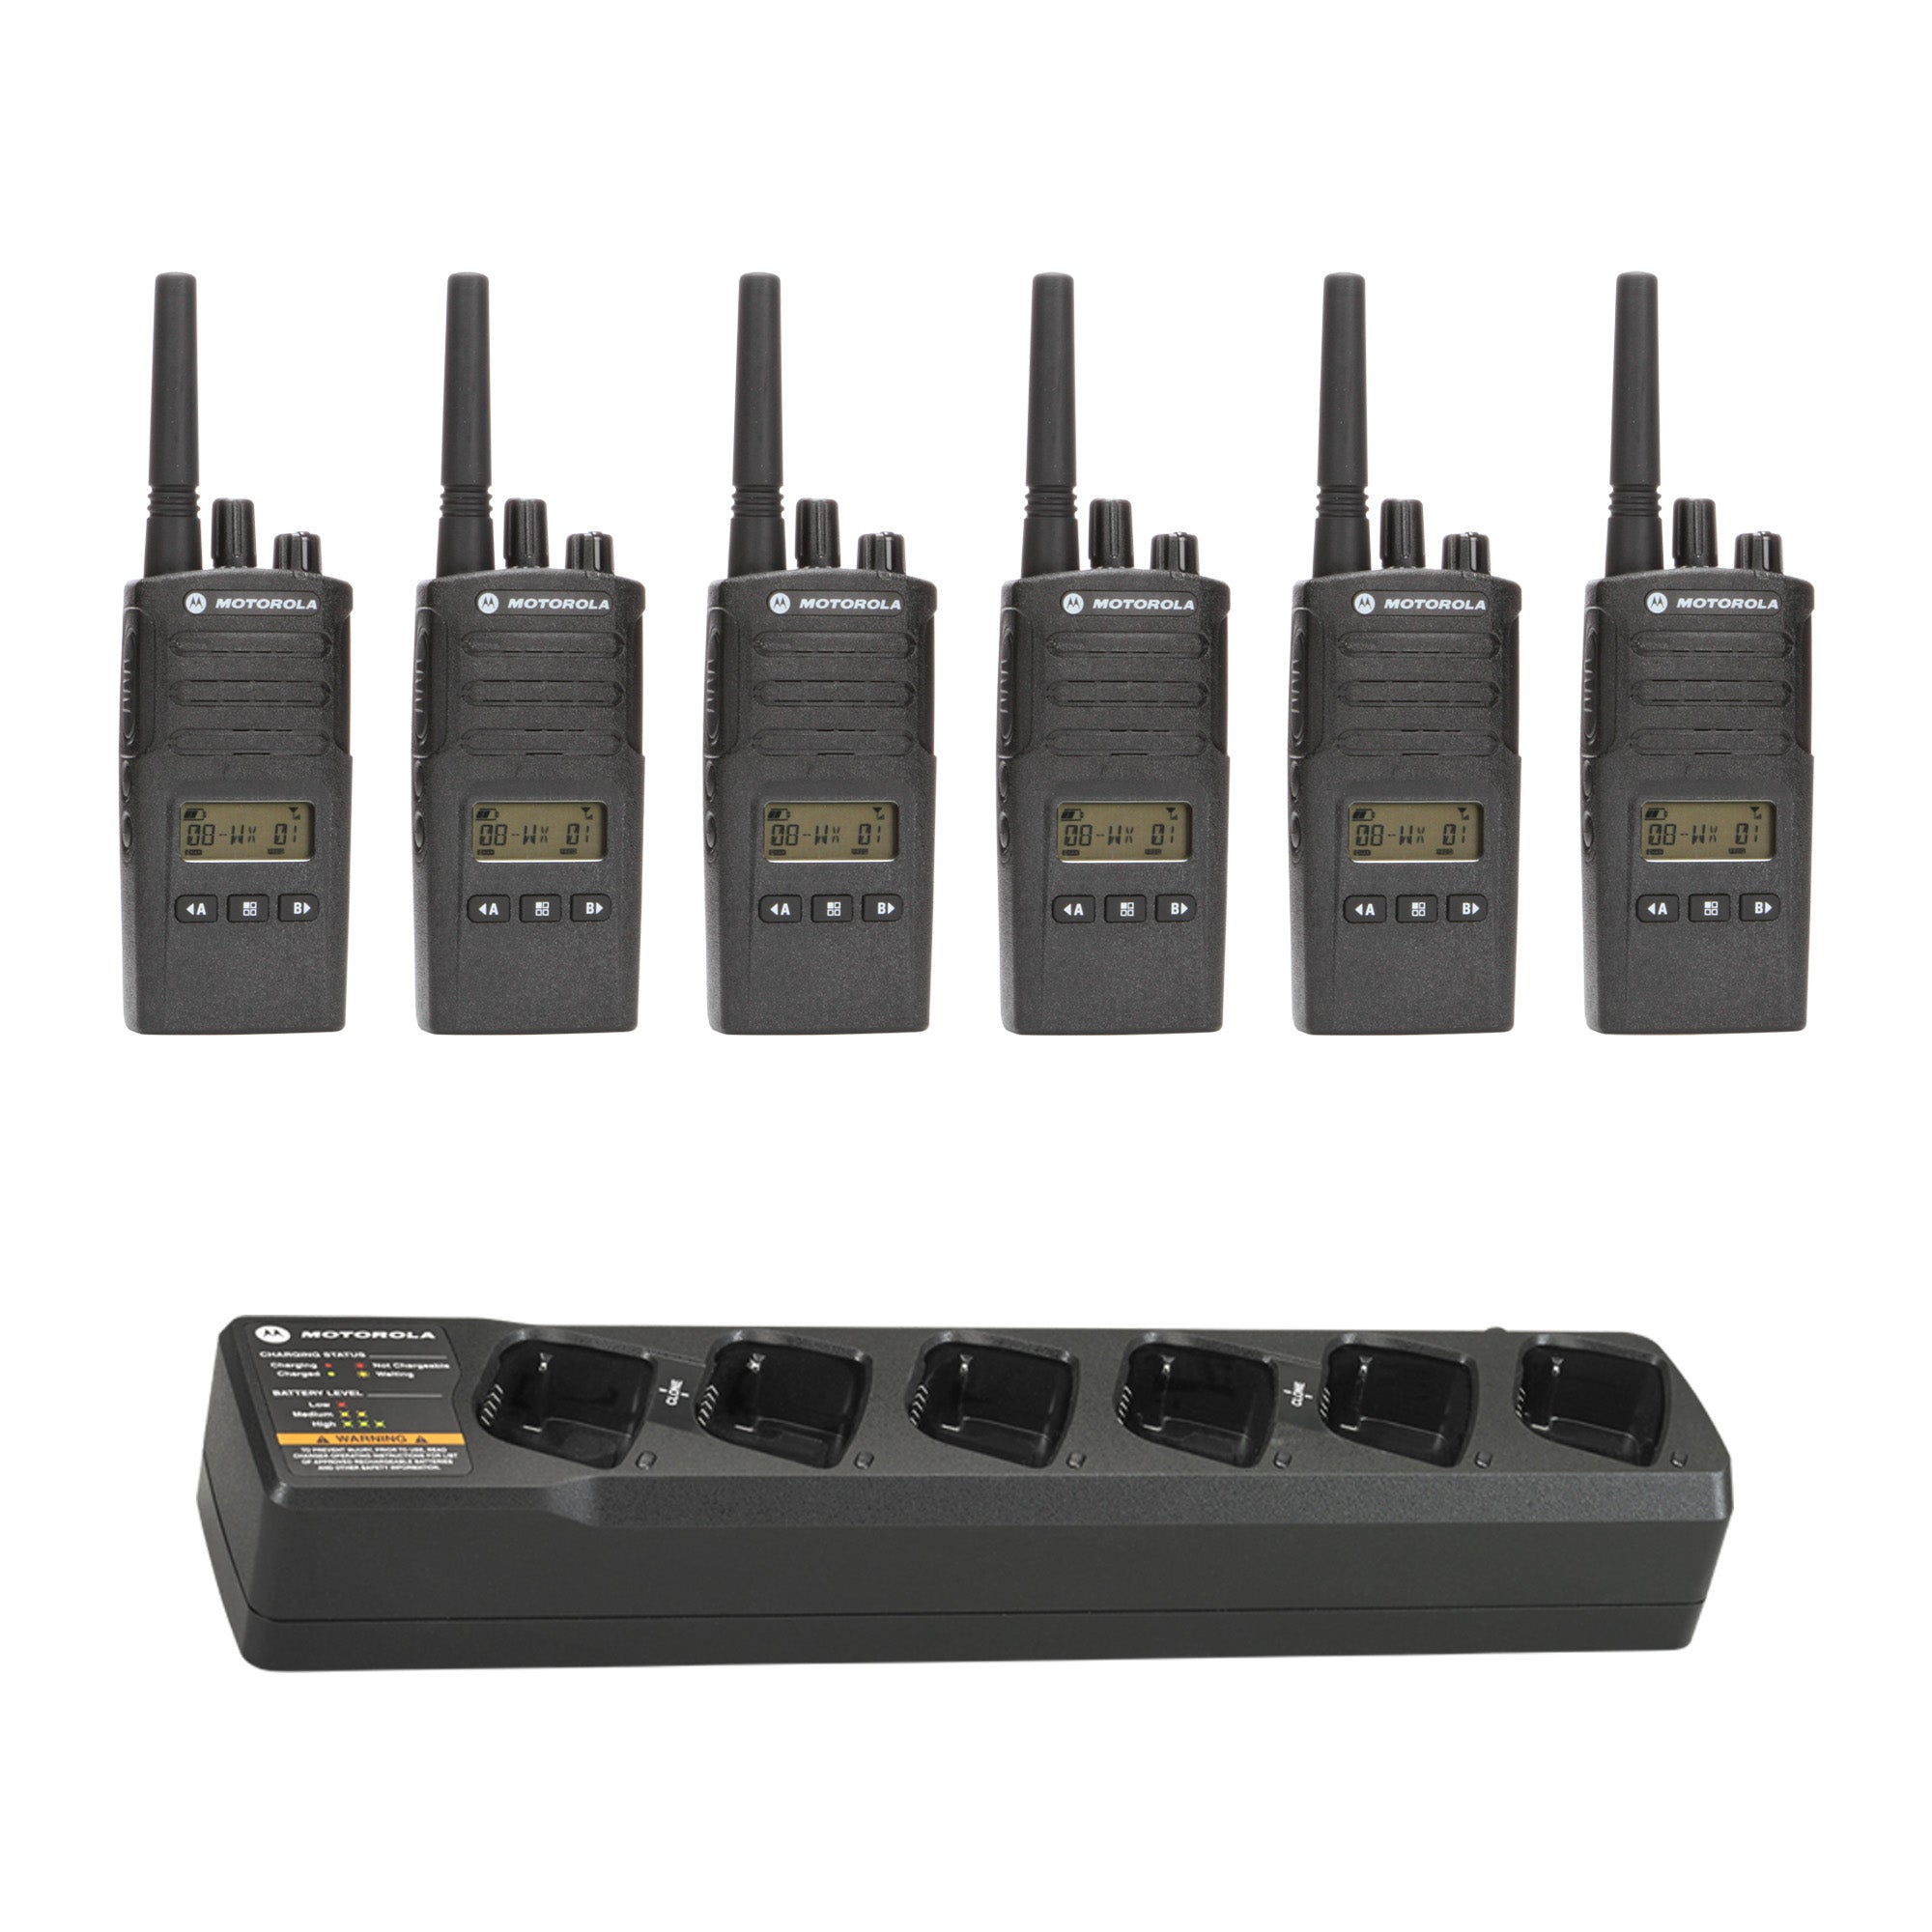 Motorola RMU2080D 6 pack with Multi Unit Charger